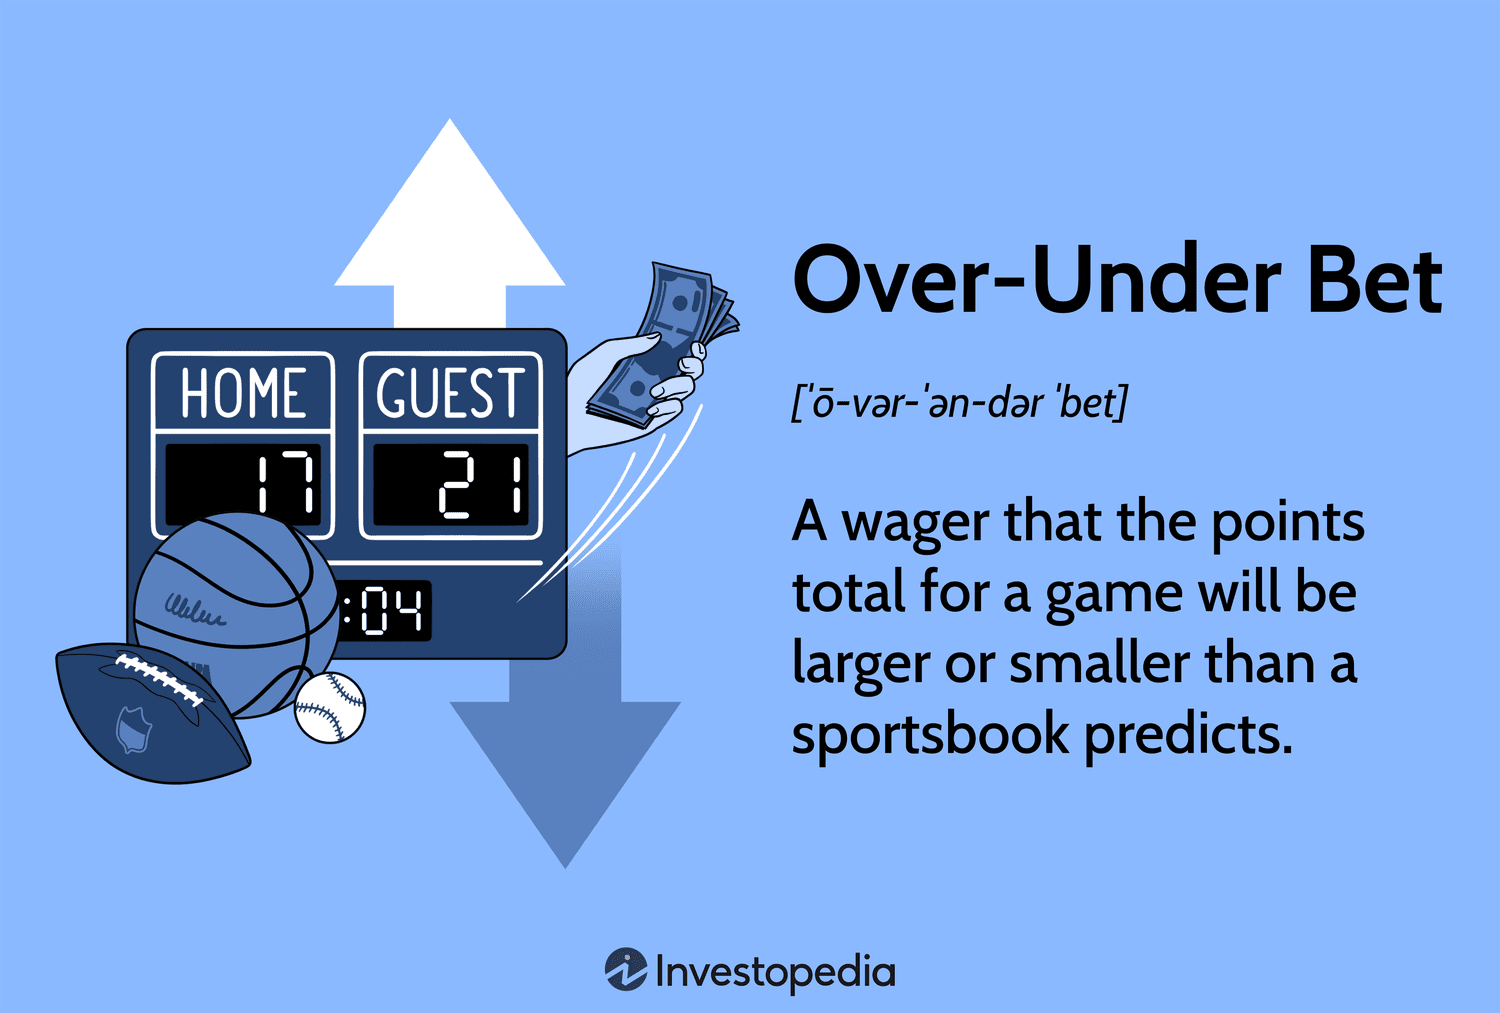 Photo: how to understand sports bet